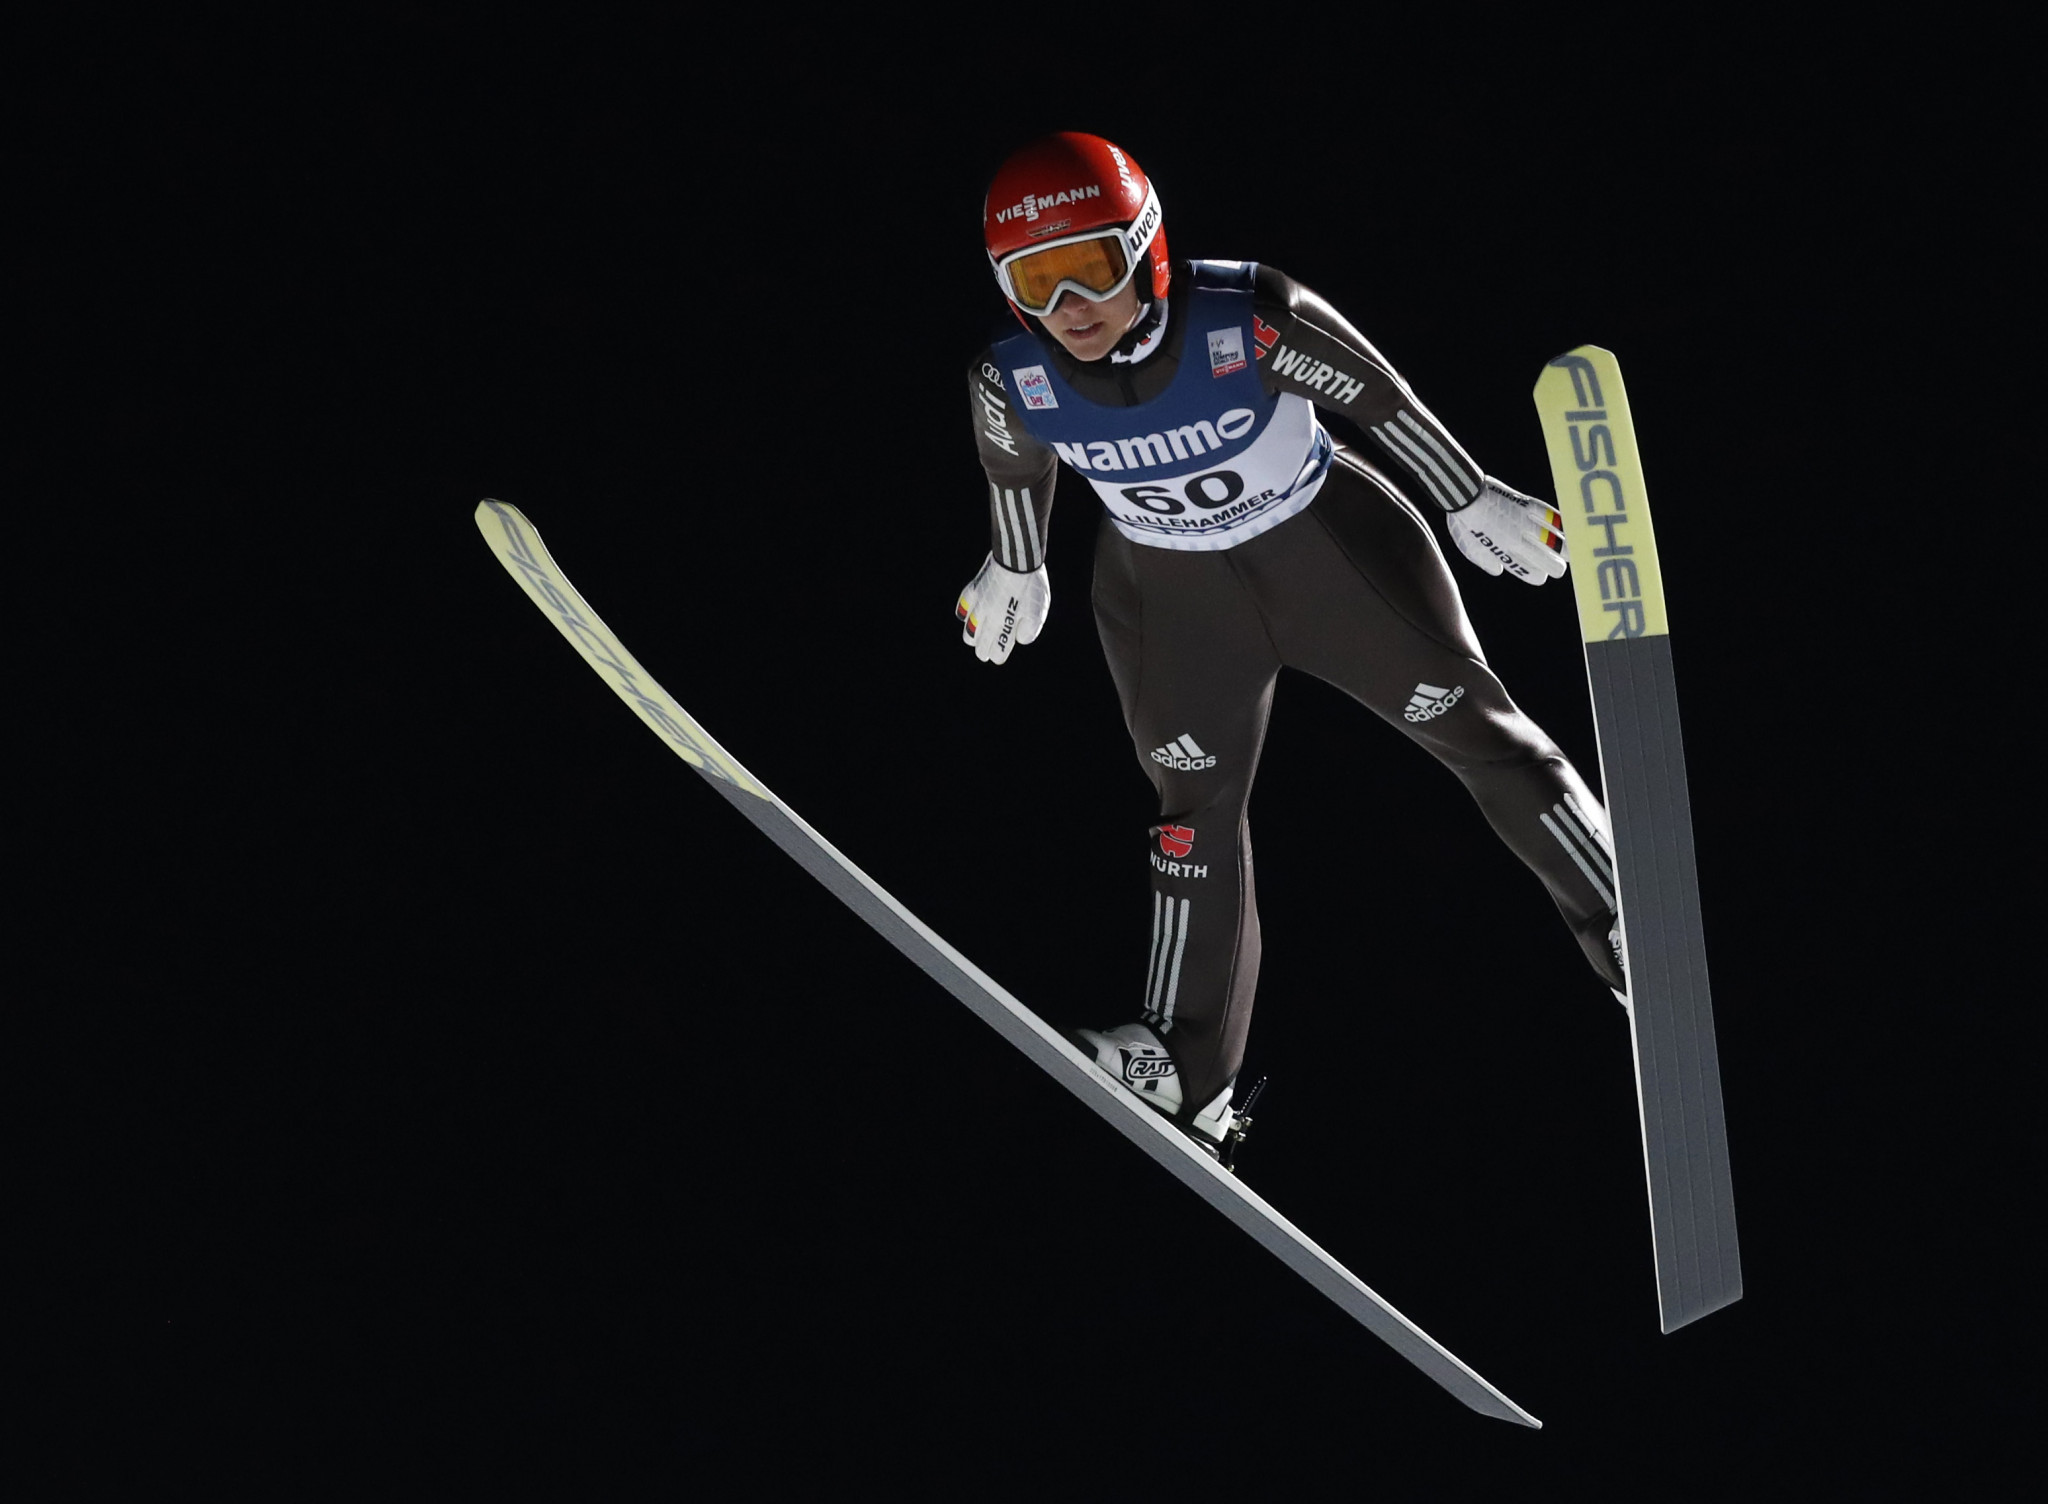 Althaus claims second straight win at FIS Ski Jumping World Cup